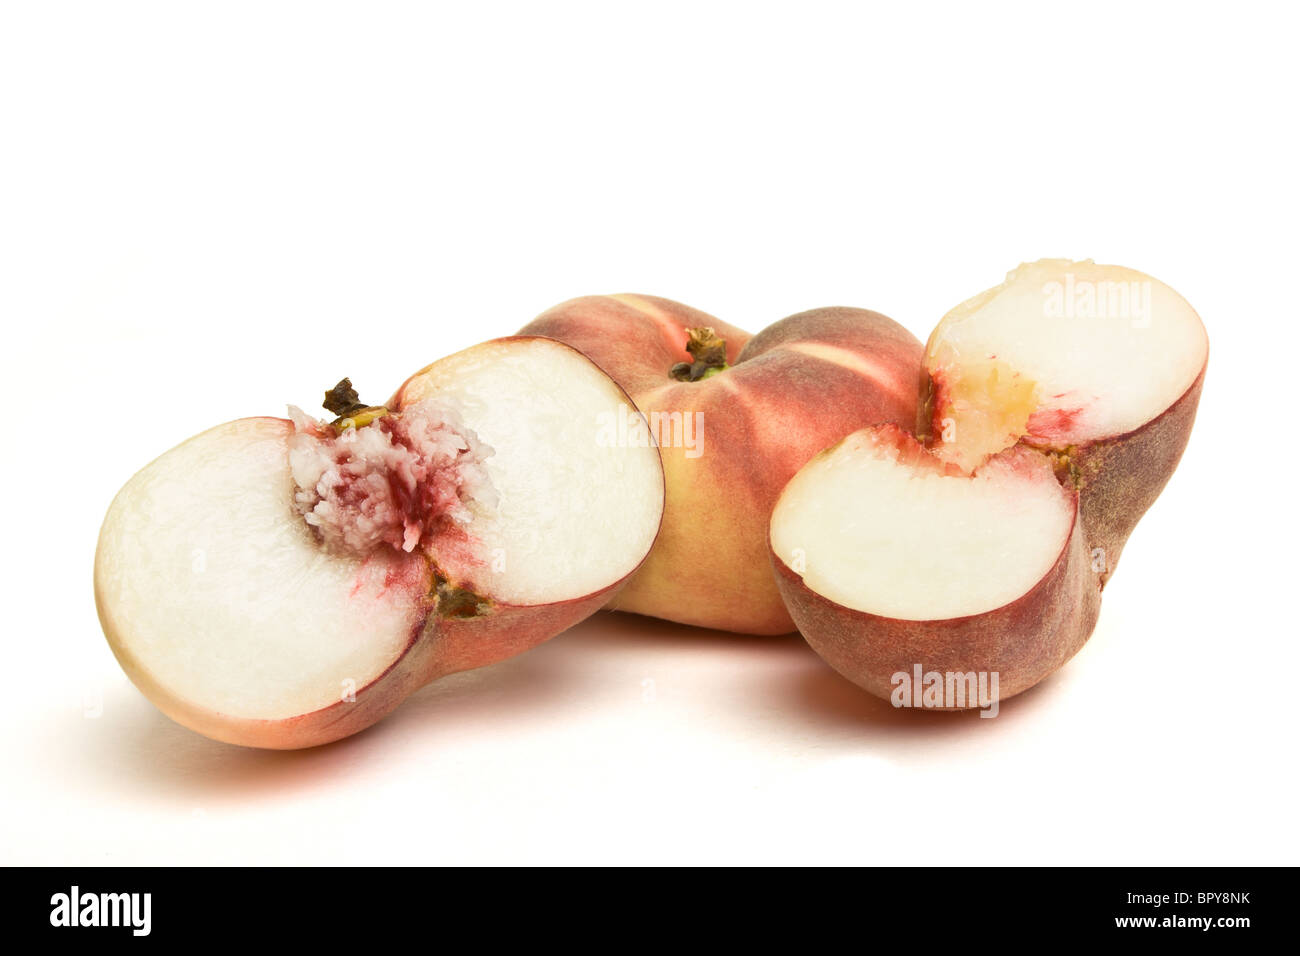 Exotic Flat peach also known as donut, chinese or saturn peach. Stock Photo